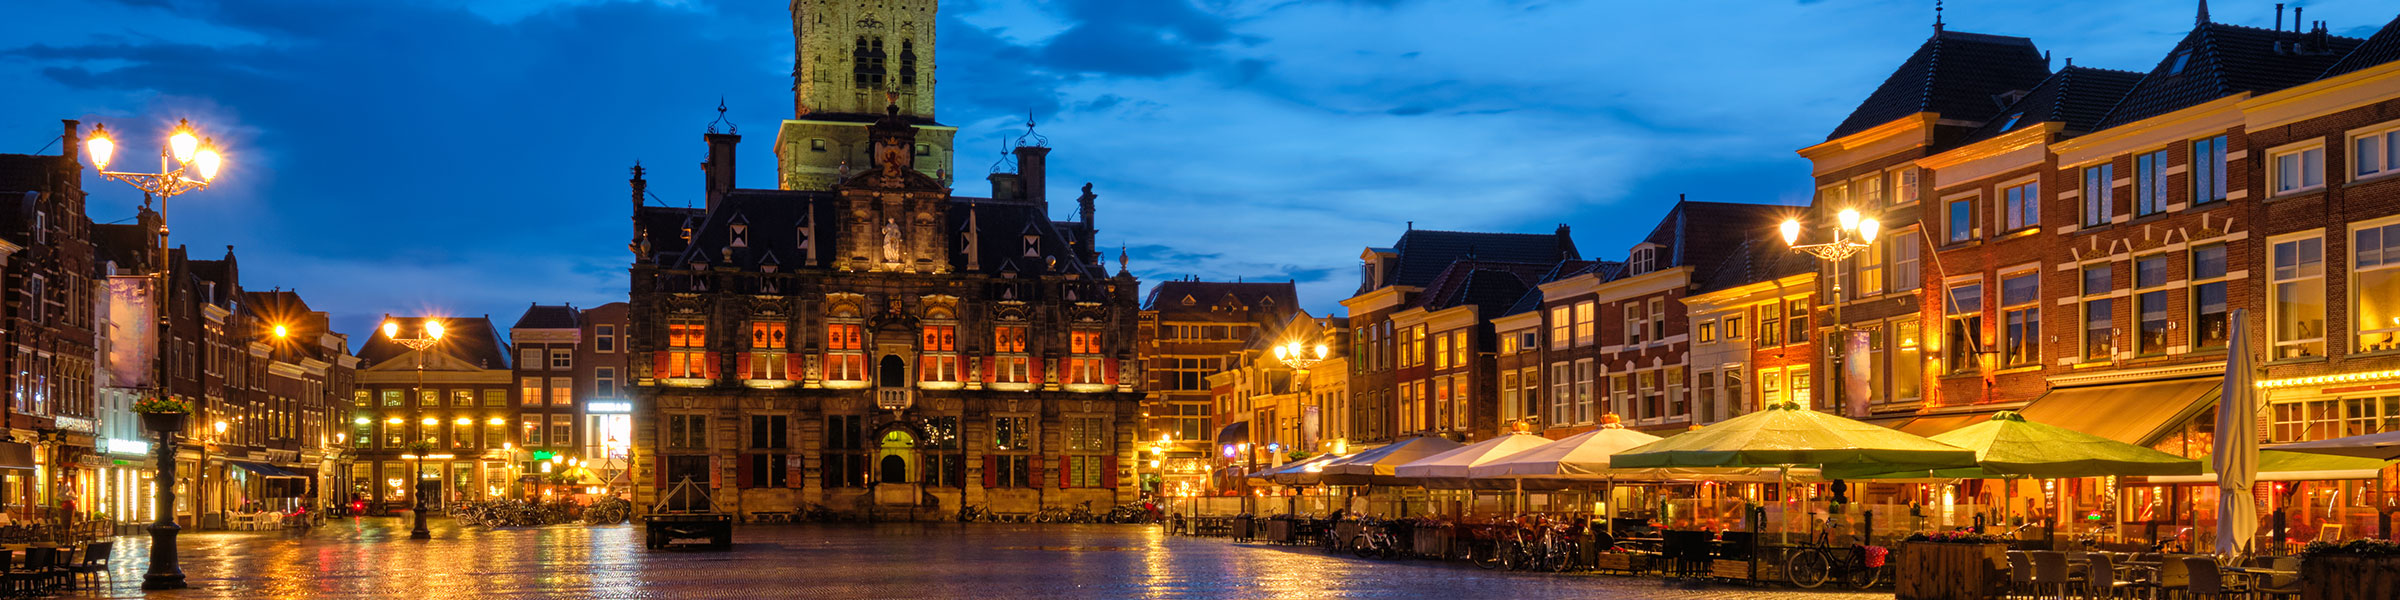 Delft City Hall and Delft Market Square Markt in the evening. Delfth, Netherlands